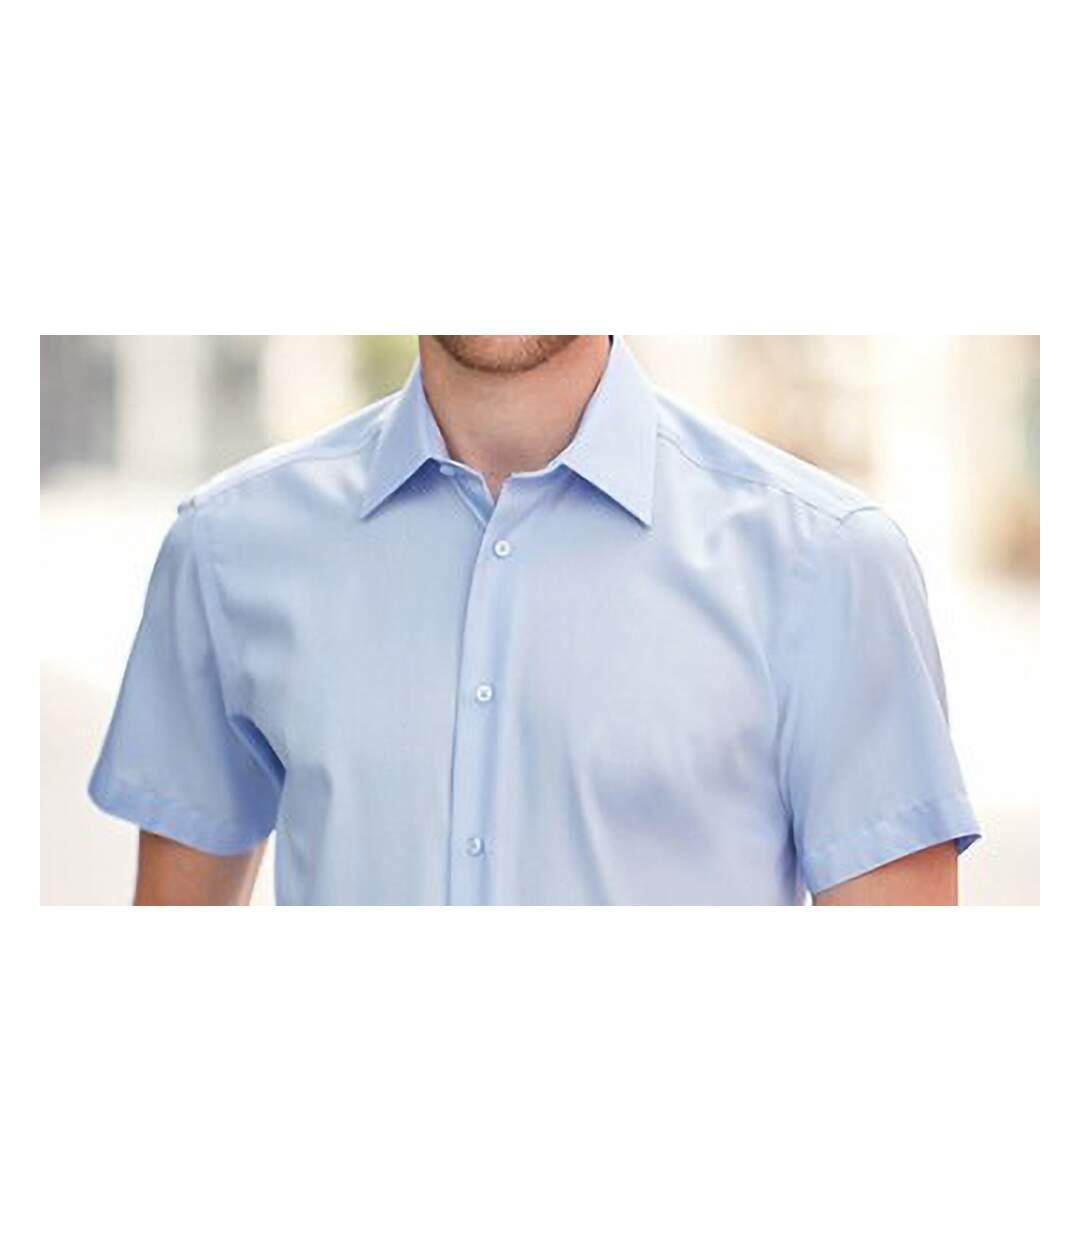 Russell Collection Mens Short Sleeve Tailored Ultimate Non-Iron Shirt (Bright Sky) - UTBC1039